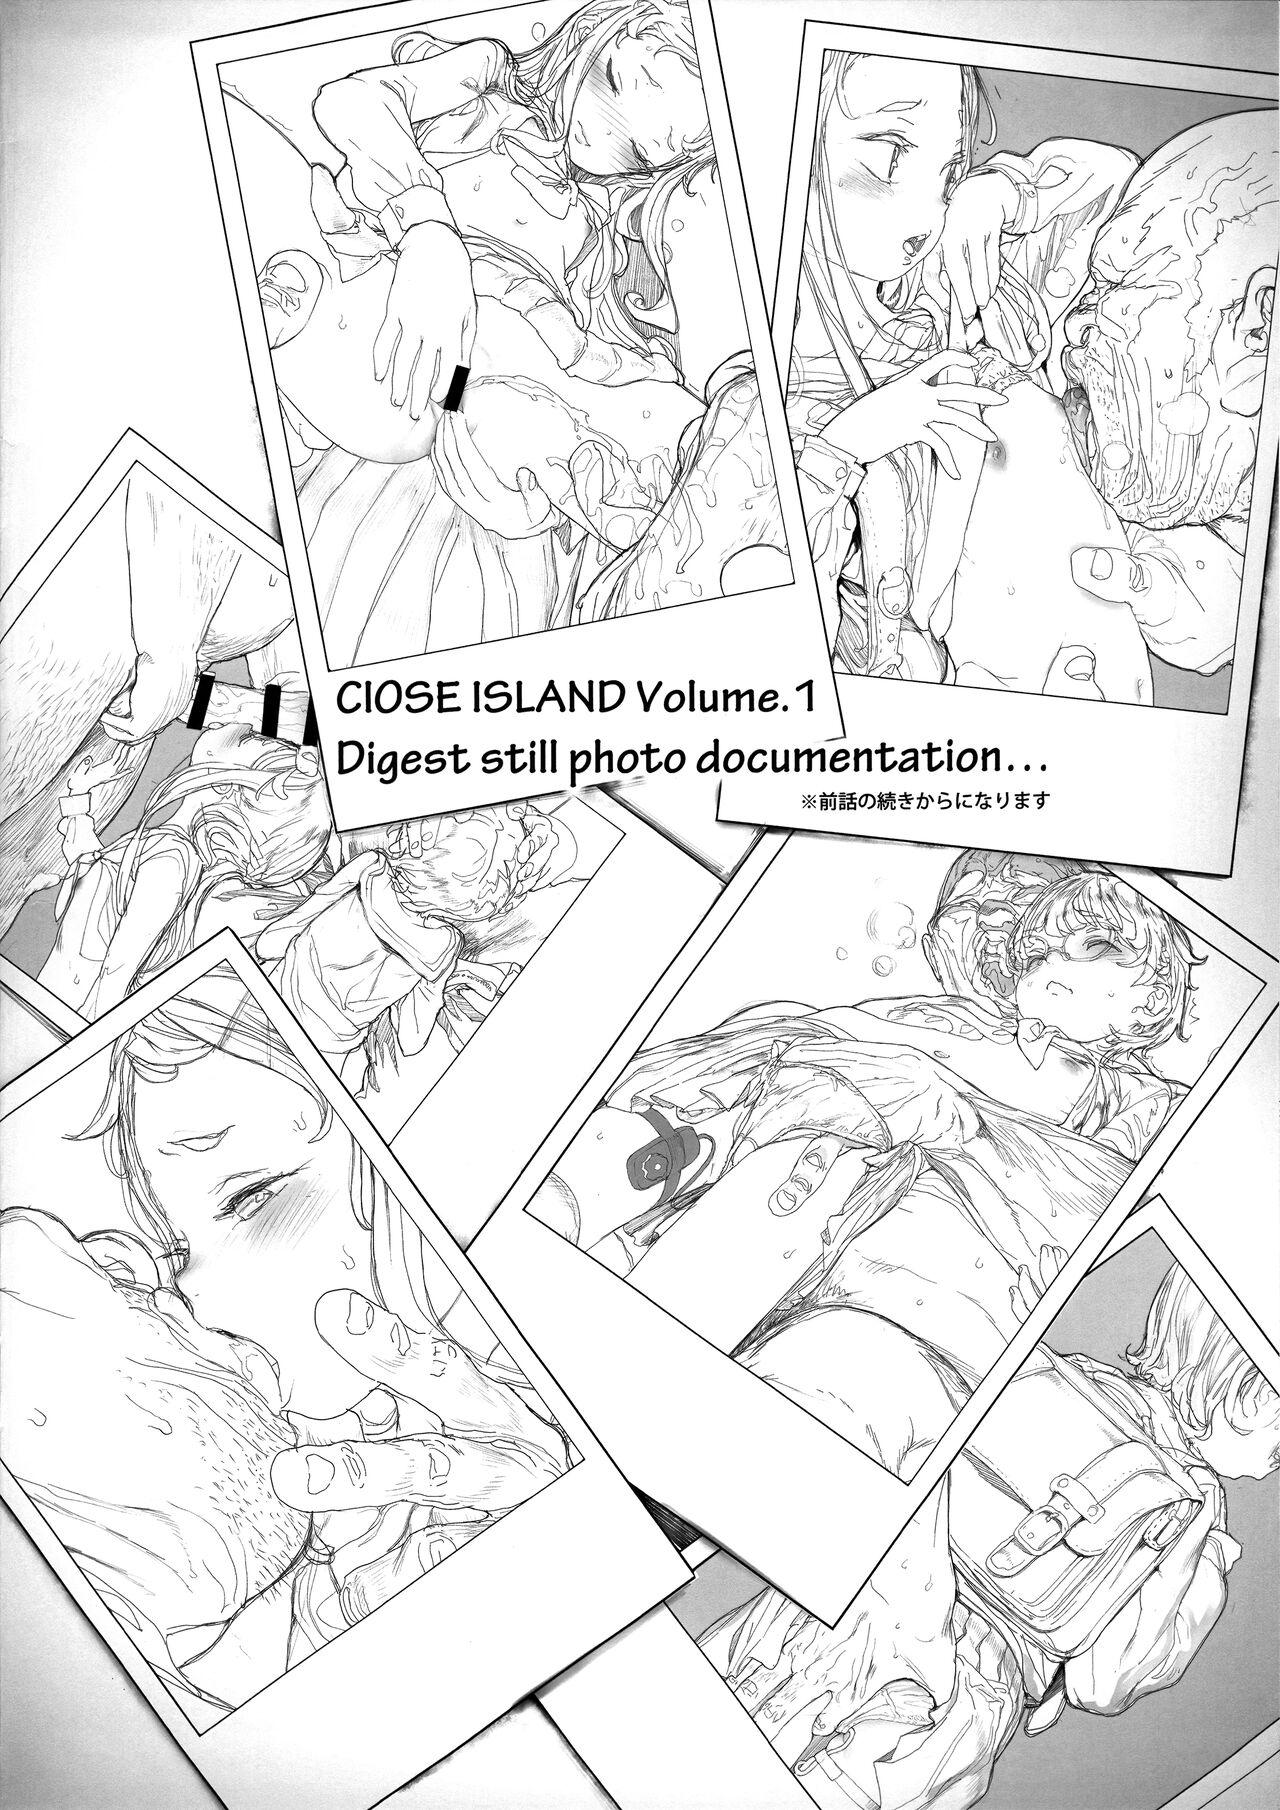 Chacal CLOSED ISLAND Volume. 2 - Original Hot Wife - Page 4